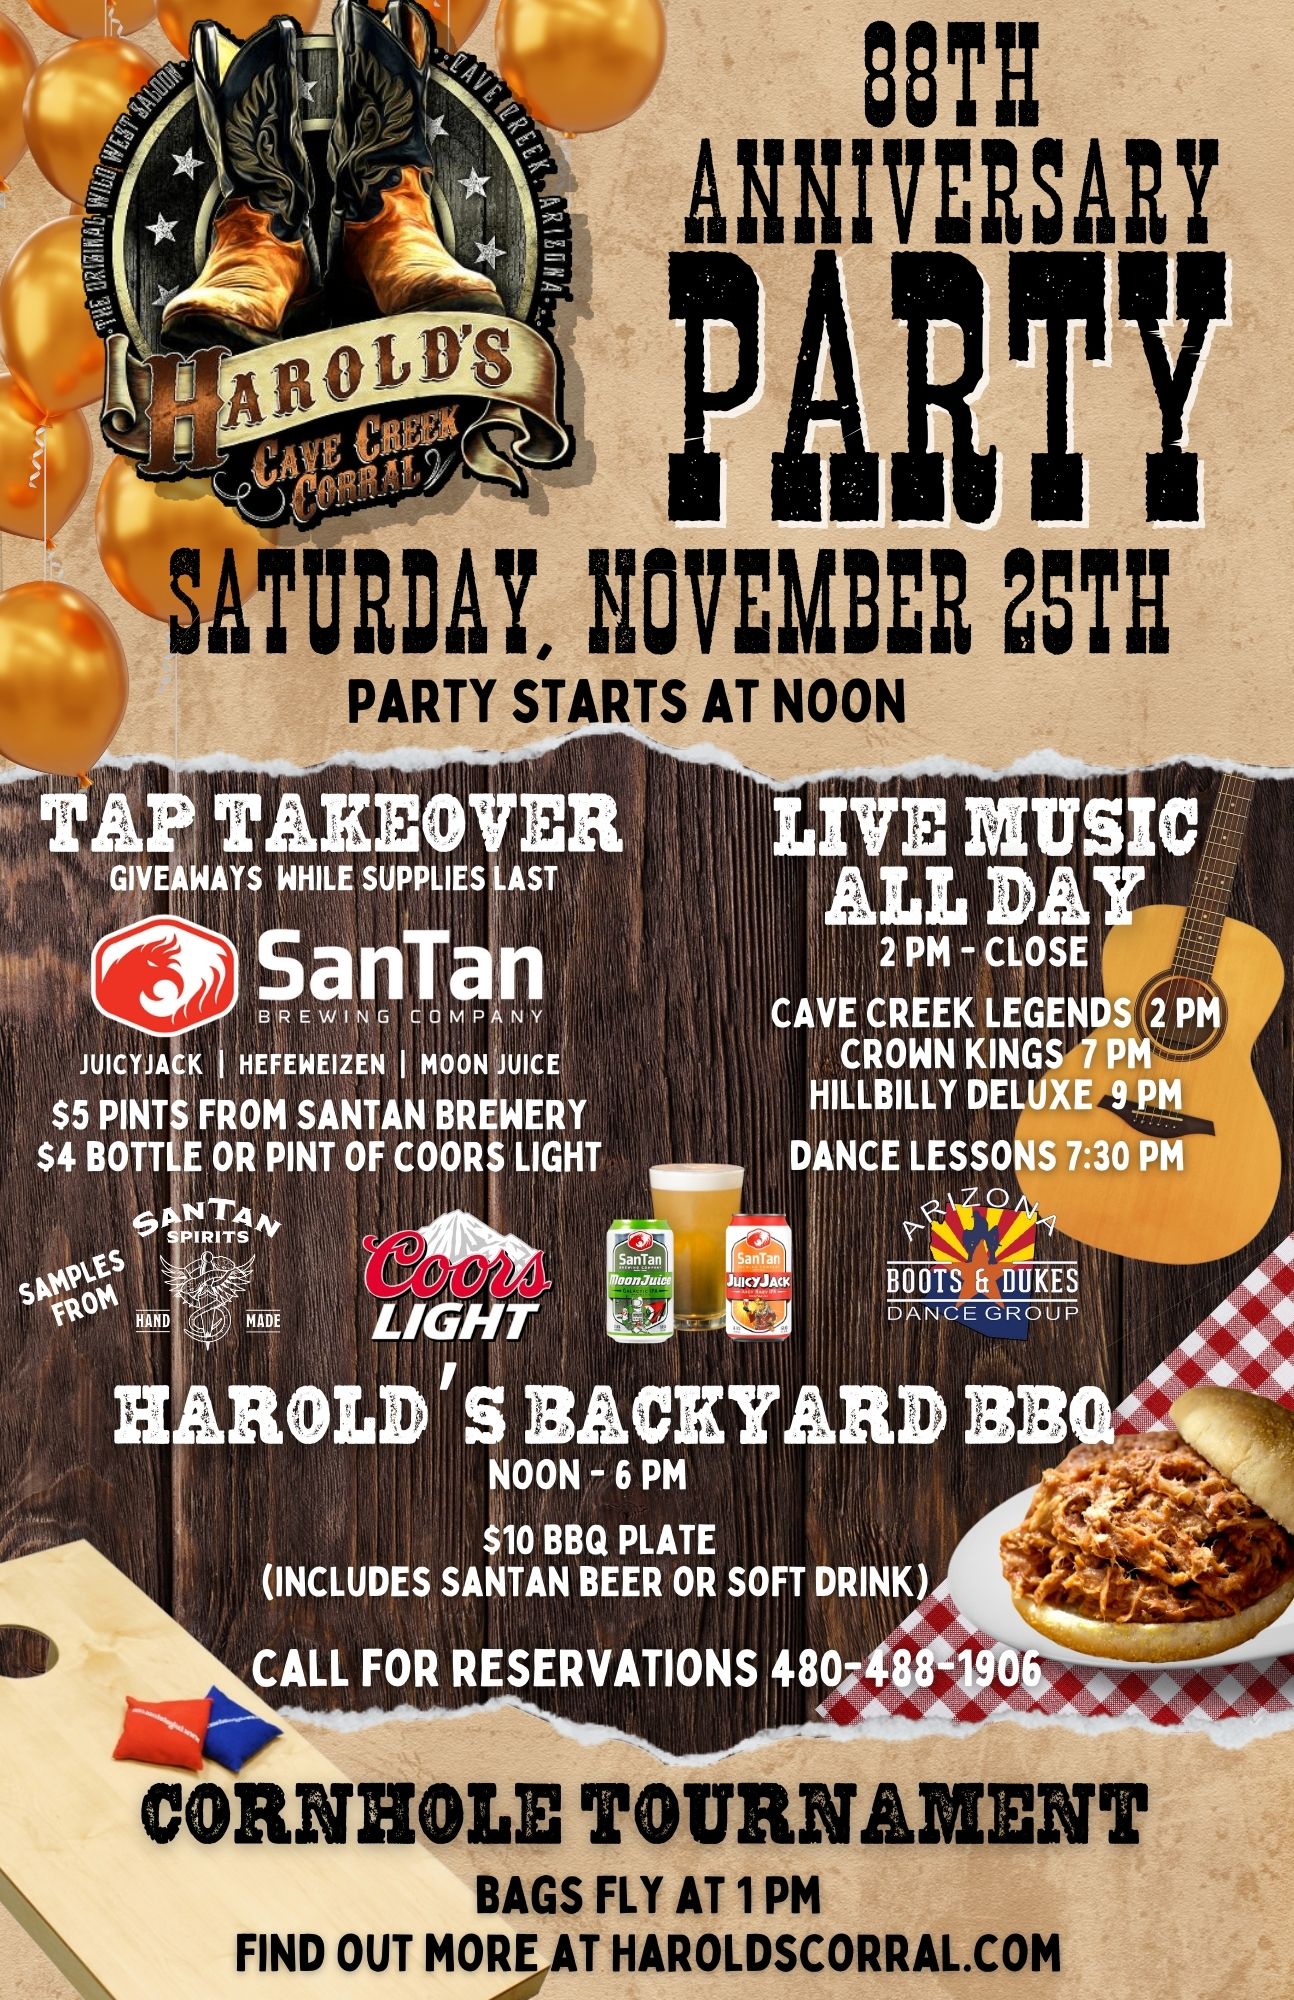 Harold's Corral's 88th Anniversary Party